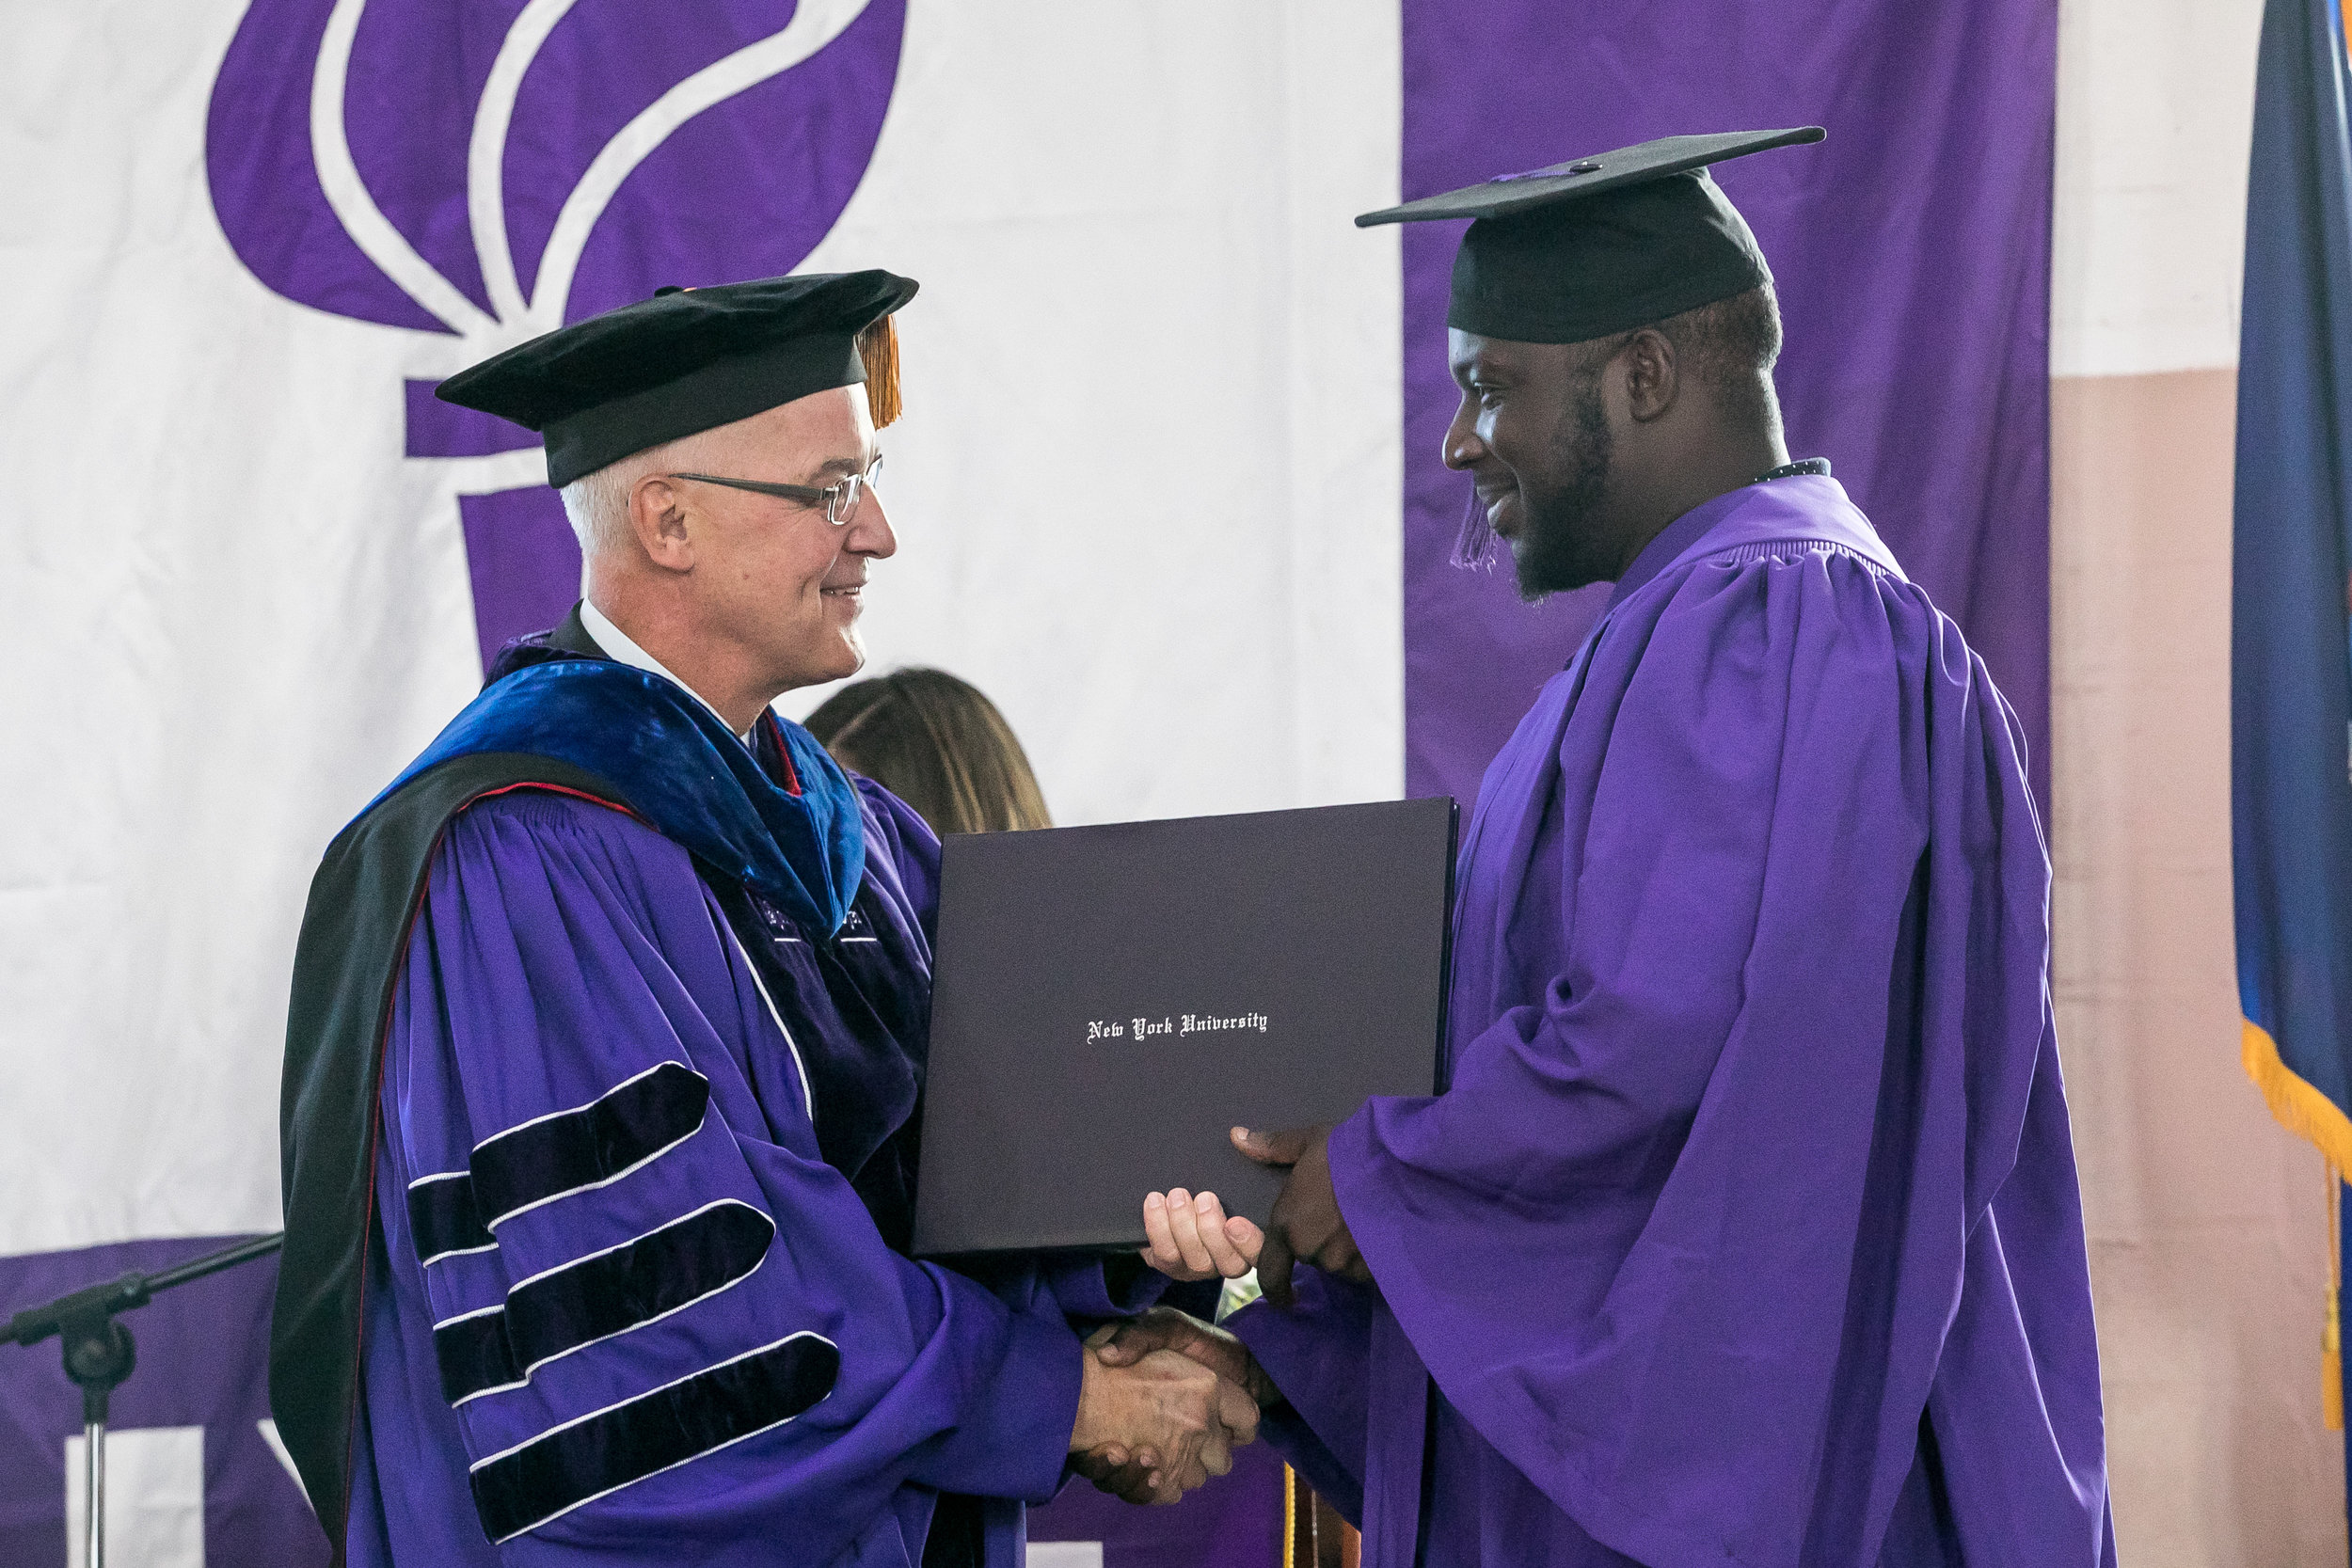  Ryan Burrell receives his diploma from President Hamilton. The graduates earned Associate of Arts Degrees from New York University in Liberal Studies. 